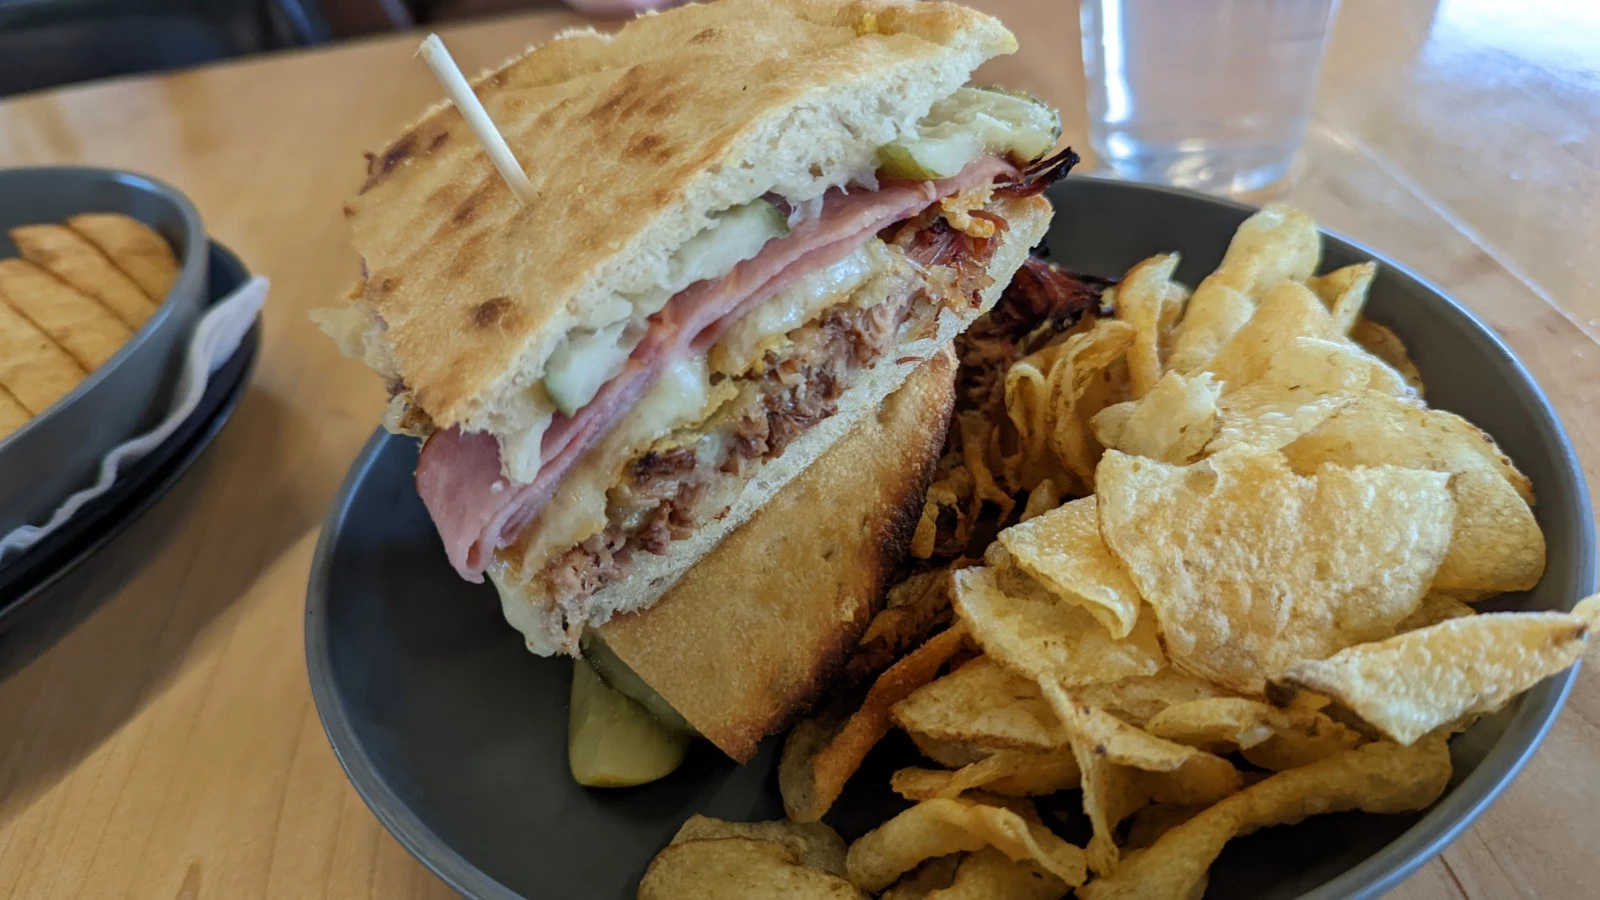 A New Place for a Cubano in Yakima